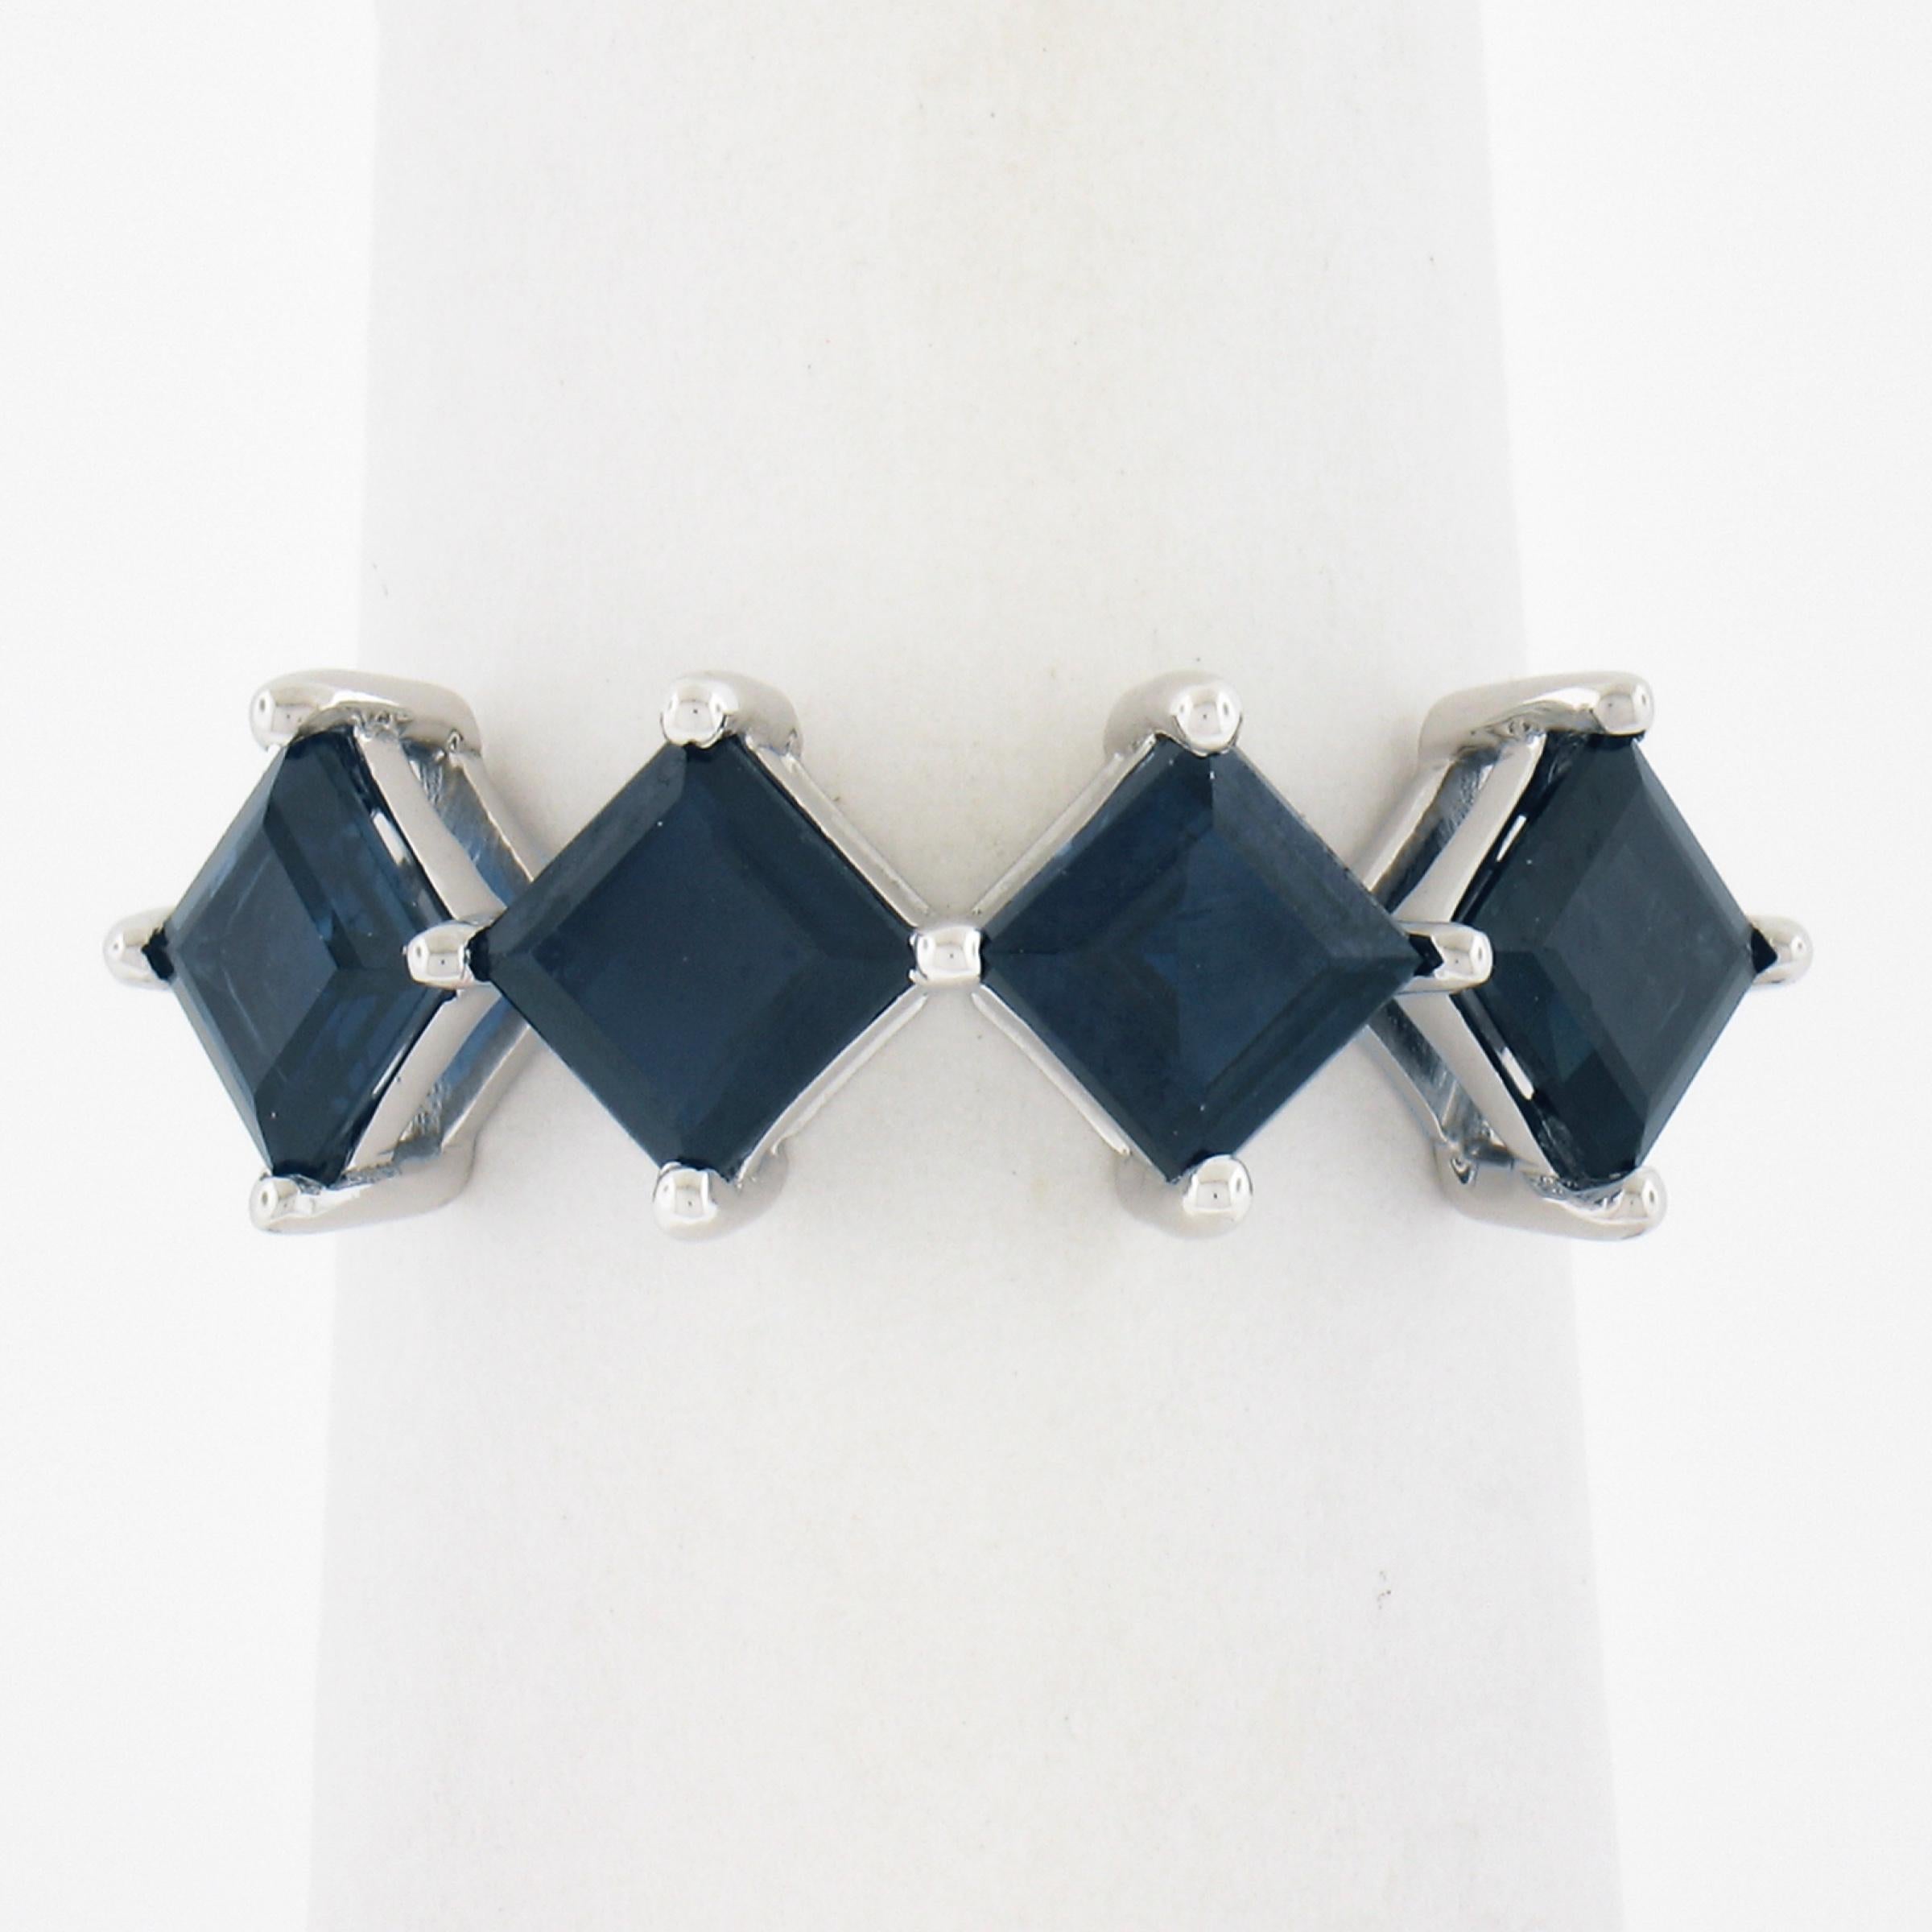 --Stone(s):--
(4) Natural Genuine Sapphires - Square Step Cut - Prong Set - Dark Blue Color 
Total Carat Weight:	2.30 (exact)

Material: Solid 18K White Gold
Weight: 3.80 Grams
Ring Size: 6.5 (Fitted on a finger. We can custom size this ring -